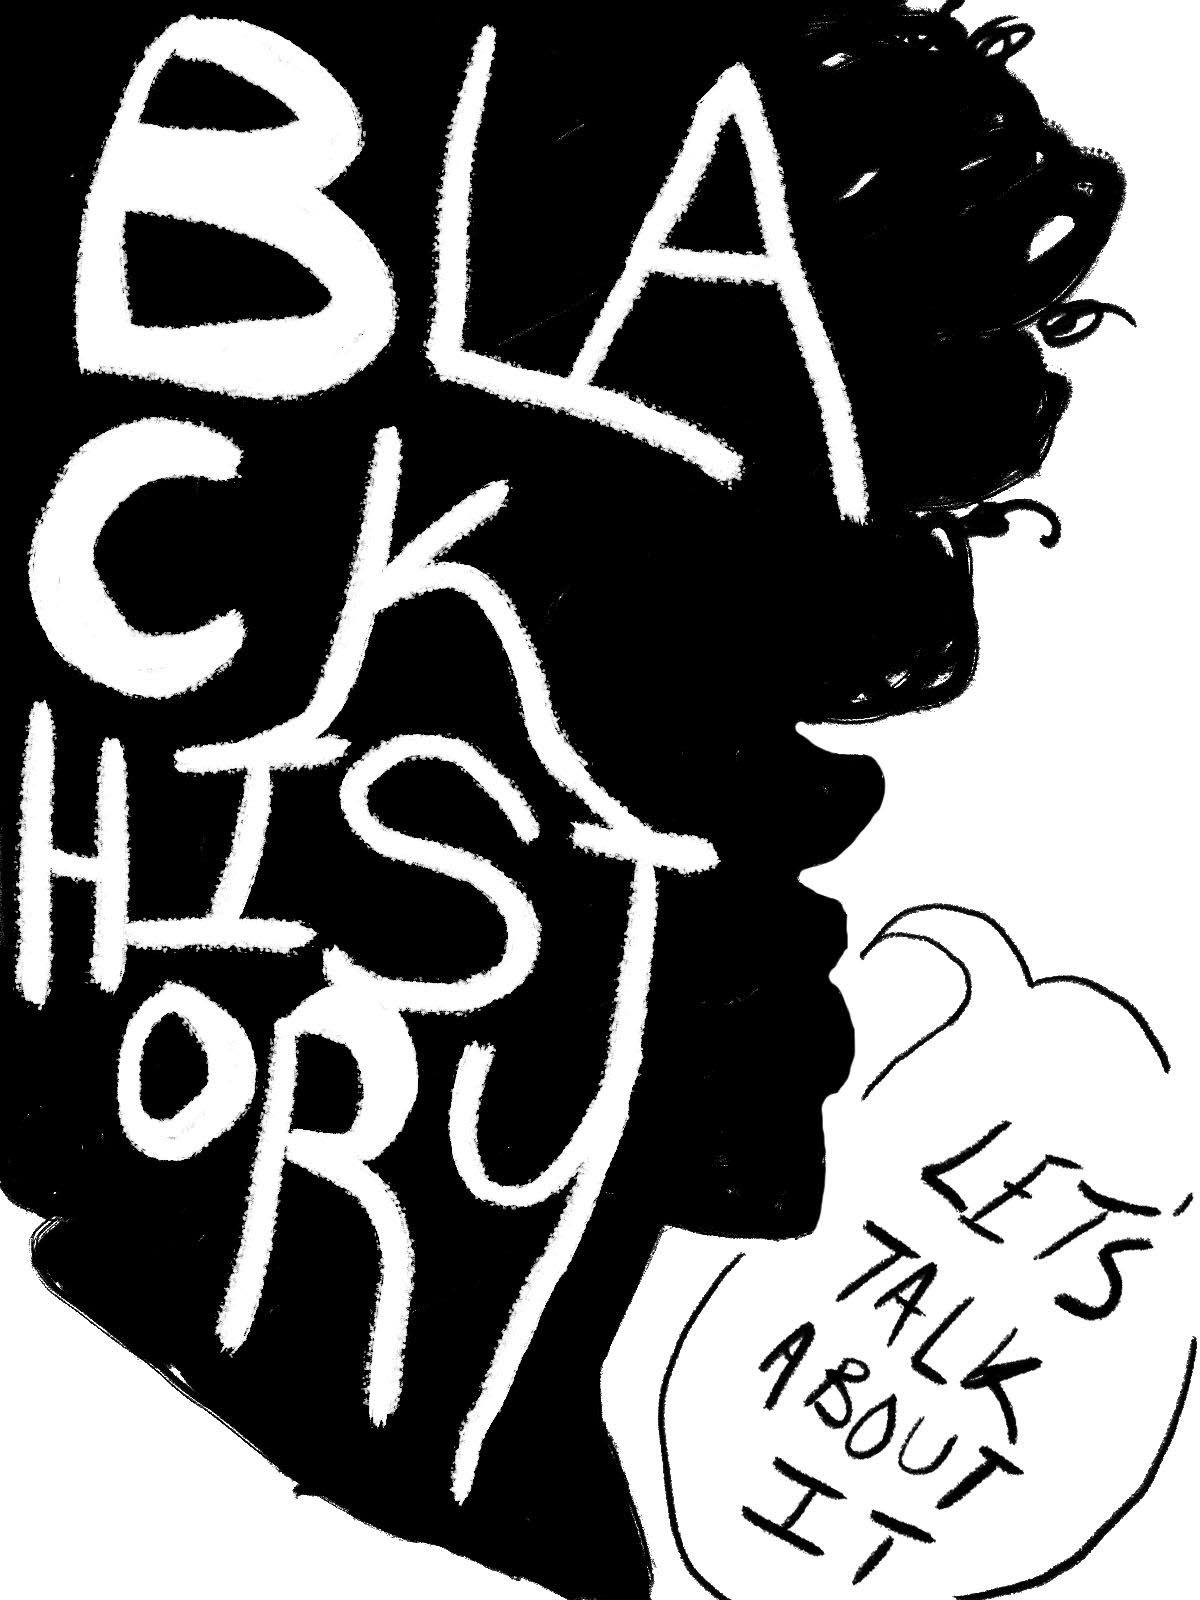 Know your roots; Black history is American history